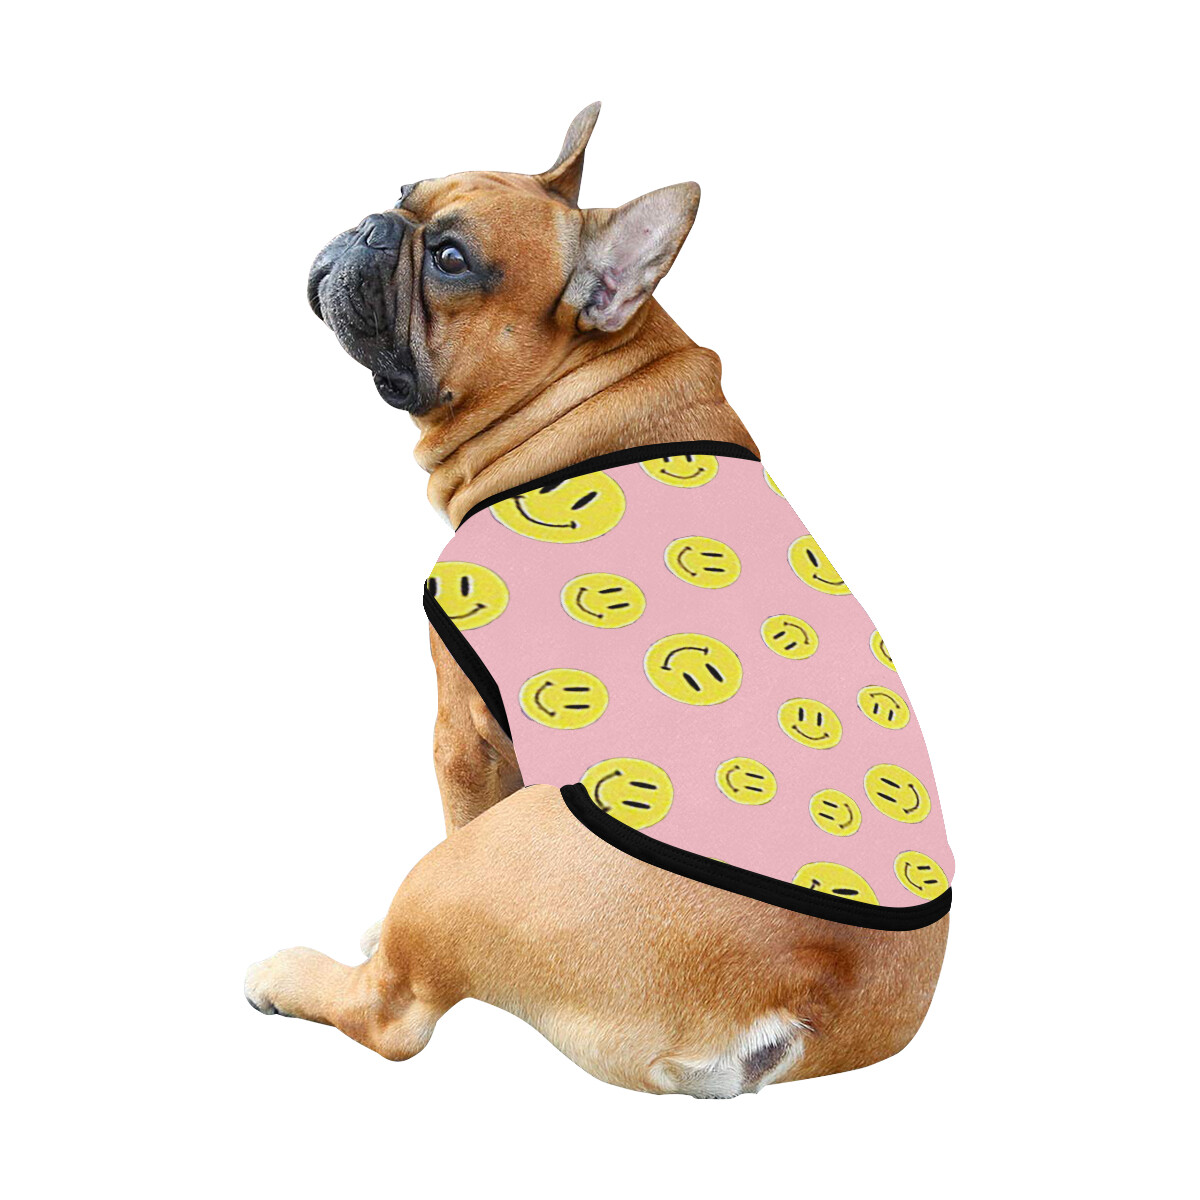 🐕 Happy faces Dog Tank Top, Dog shirt, Dog clothes, Gifts, front back print, 7 sizes XS to 3XL, dog t-shirt, dog t-shirt, dog gift, pink